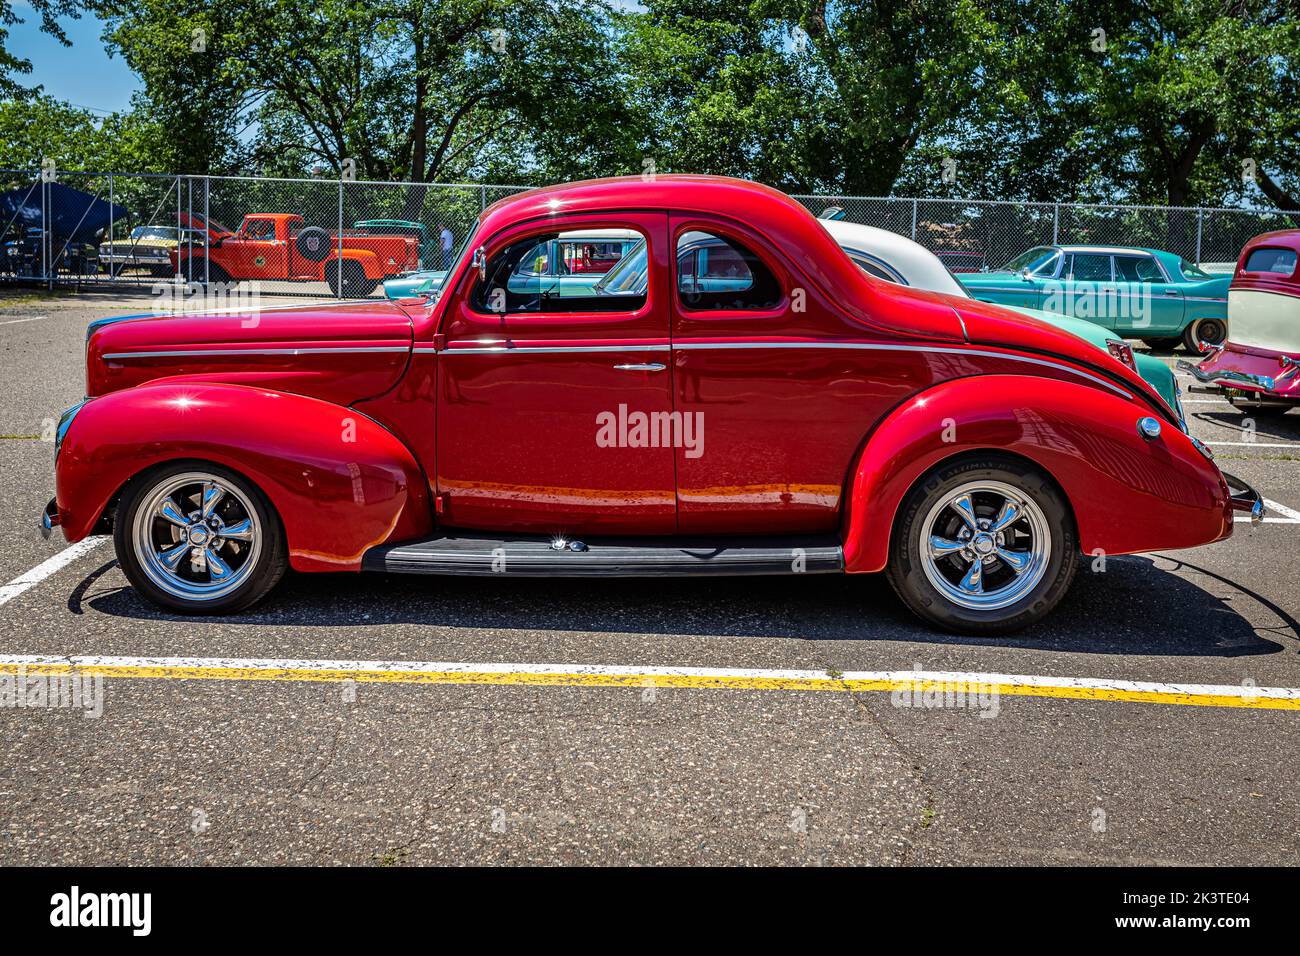 Falcon Heights, MN - June 18, 2022: High perspective side view of a 1940 Ford Deluxe Flathead V8 Coupe at a local car show. Stock Photo